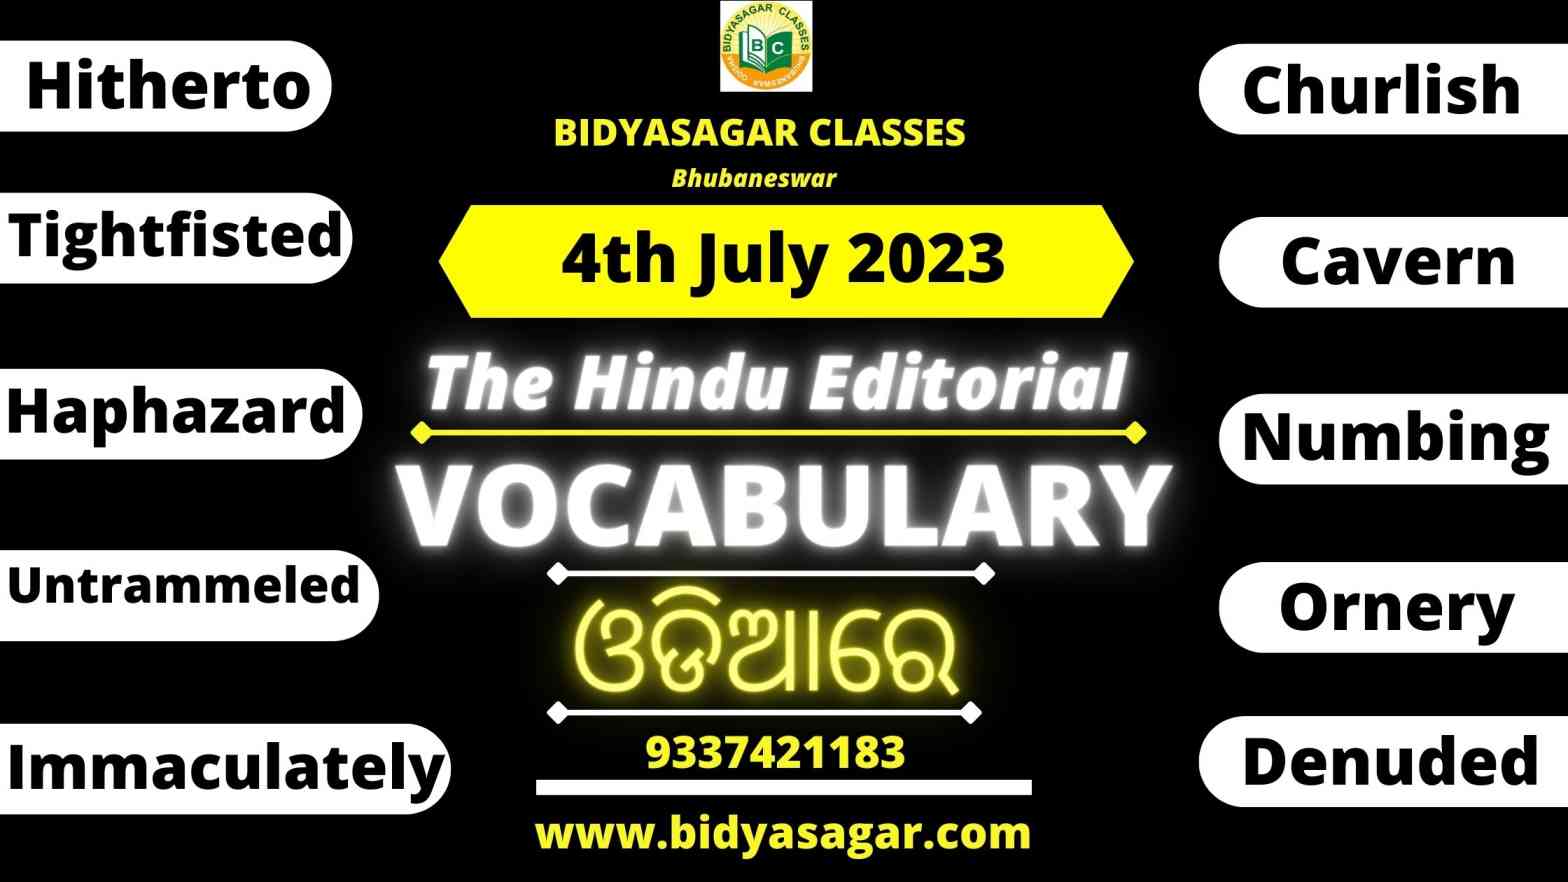 The Hindu Editorial Vocabulary of 4th July 2023